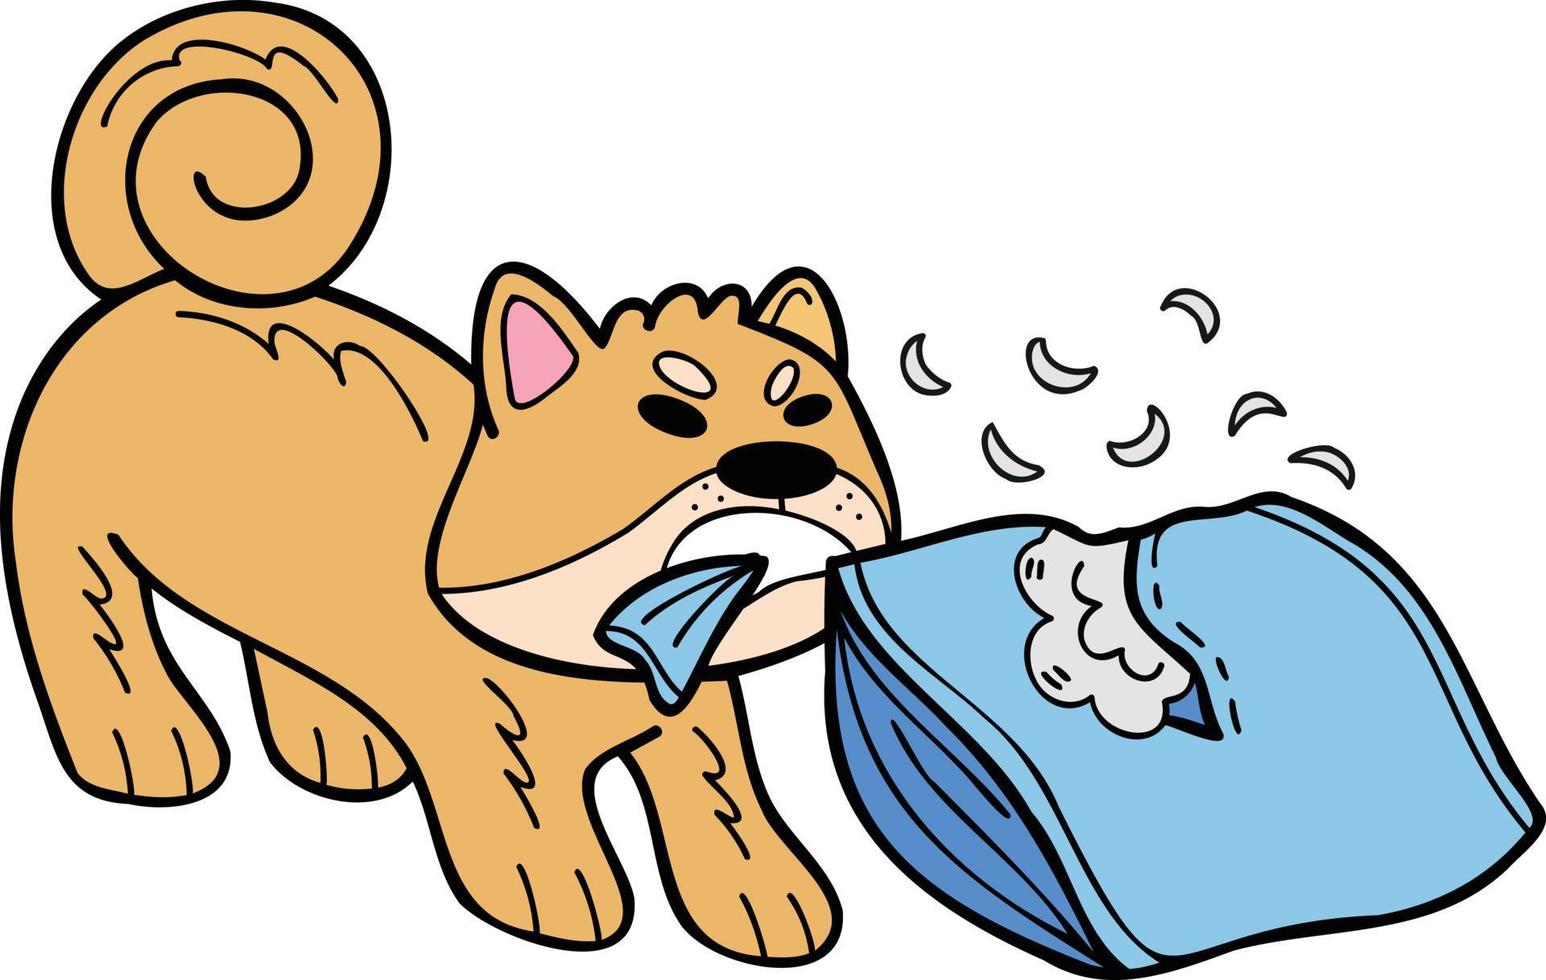 Hand Drawn Shiba Inu Dog biting pillow illustration in doodle style vector